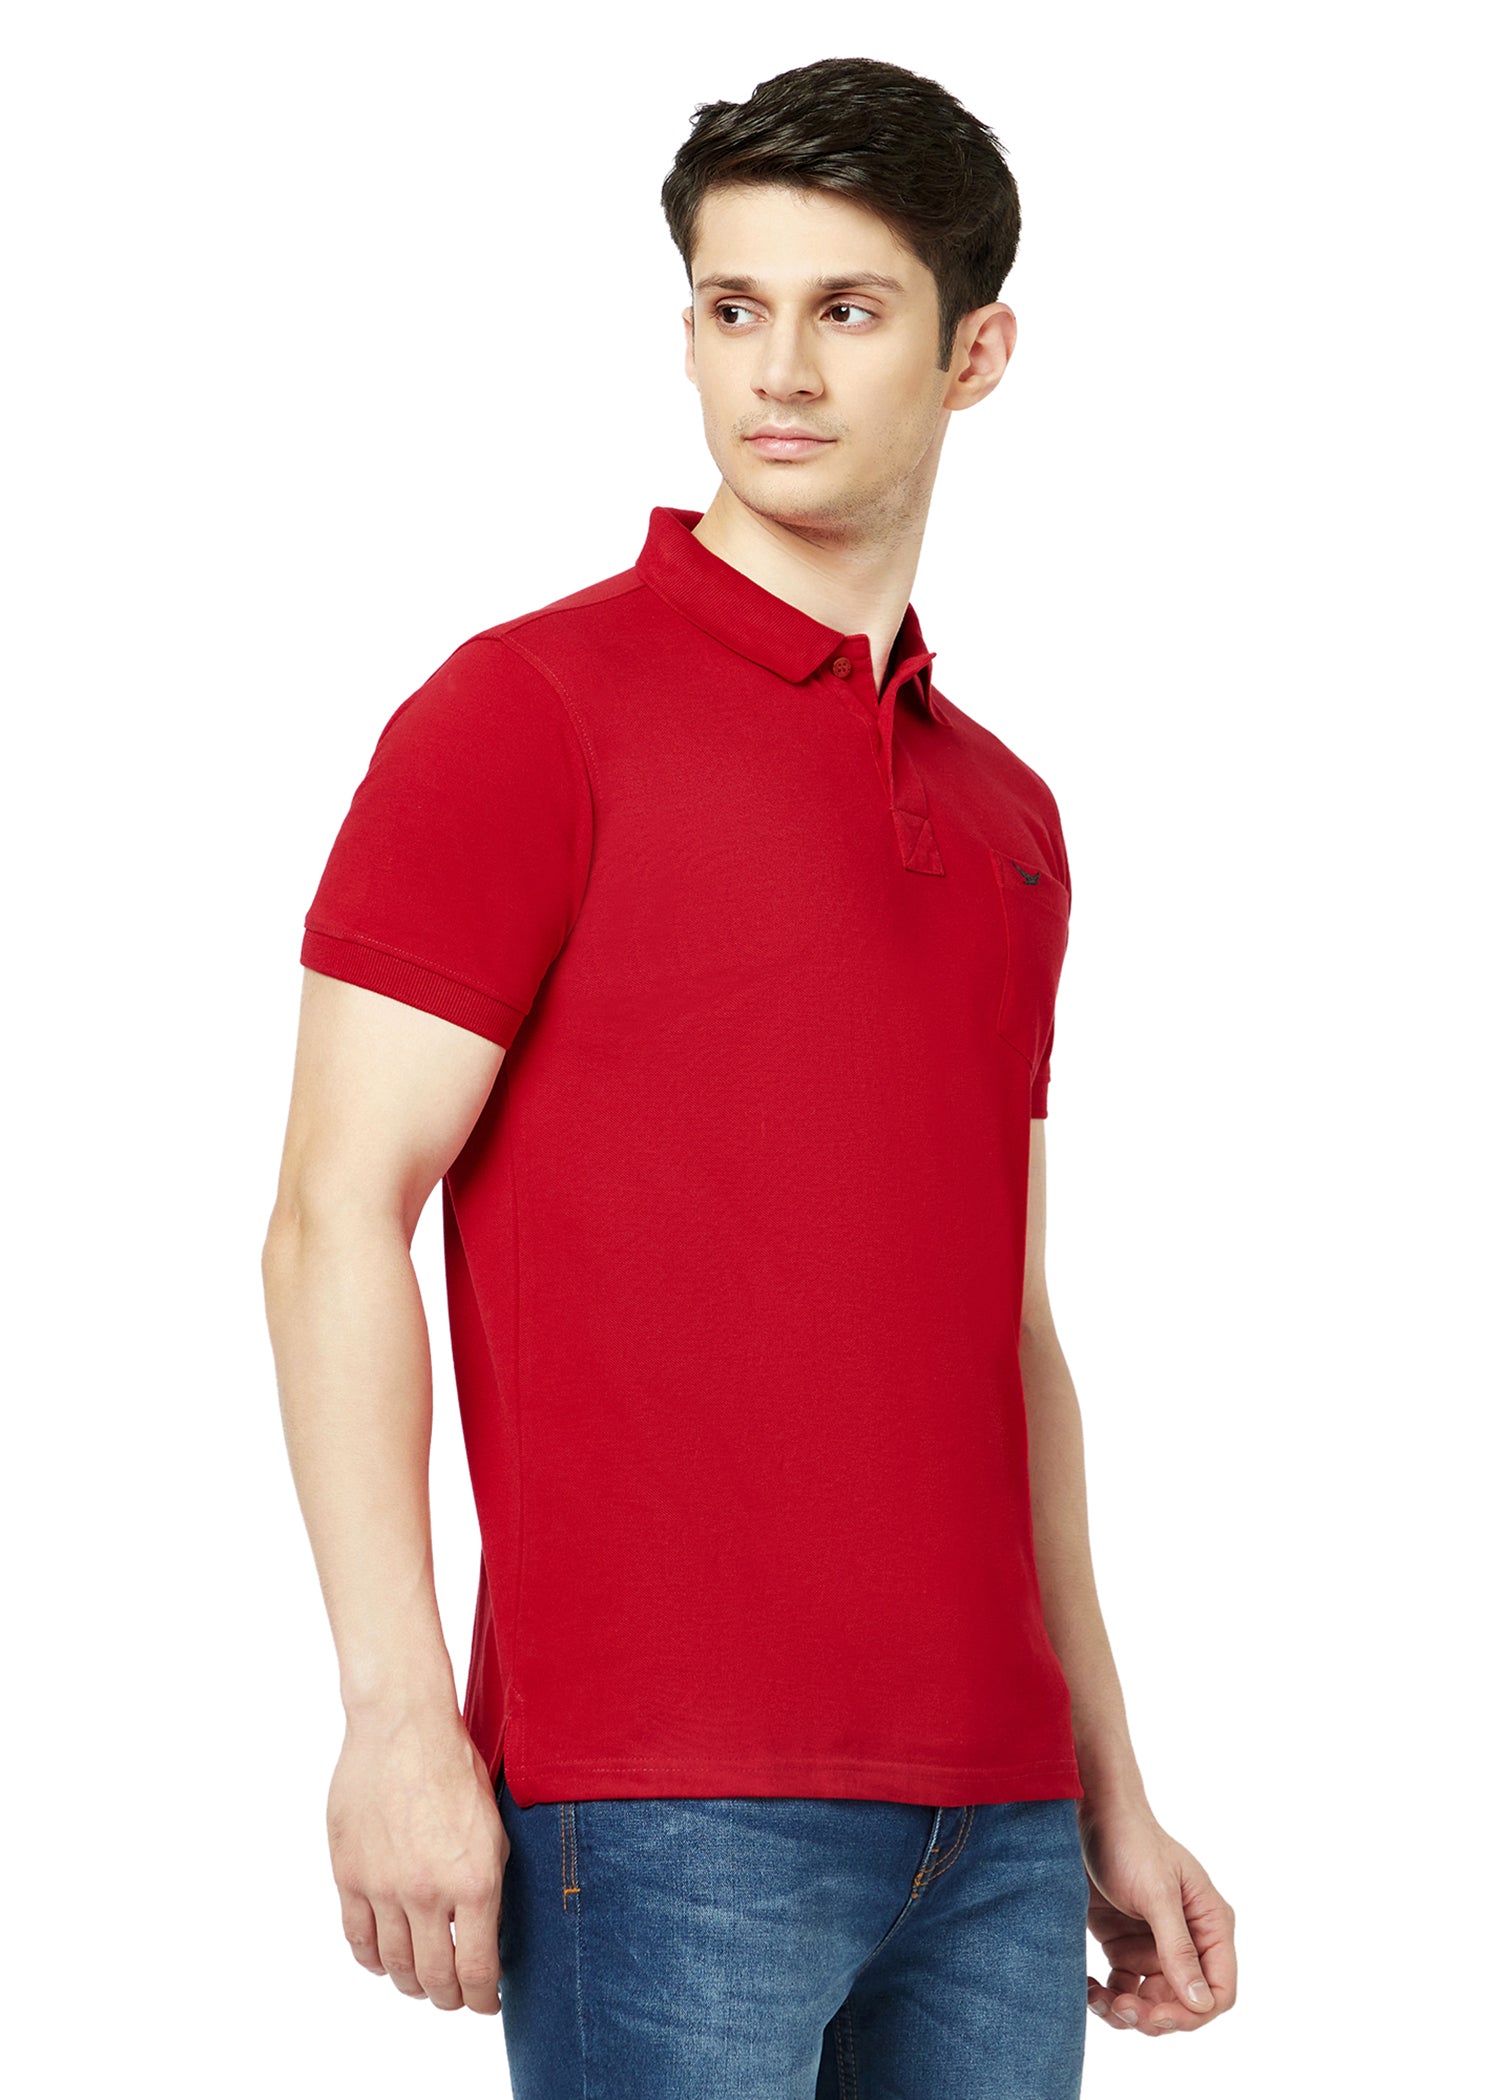 Hiflyers Men'S Solid Regular Fit Polo T-Shirt With Pocket -Red